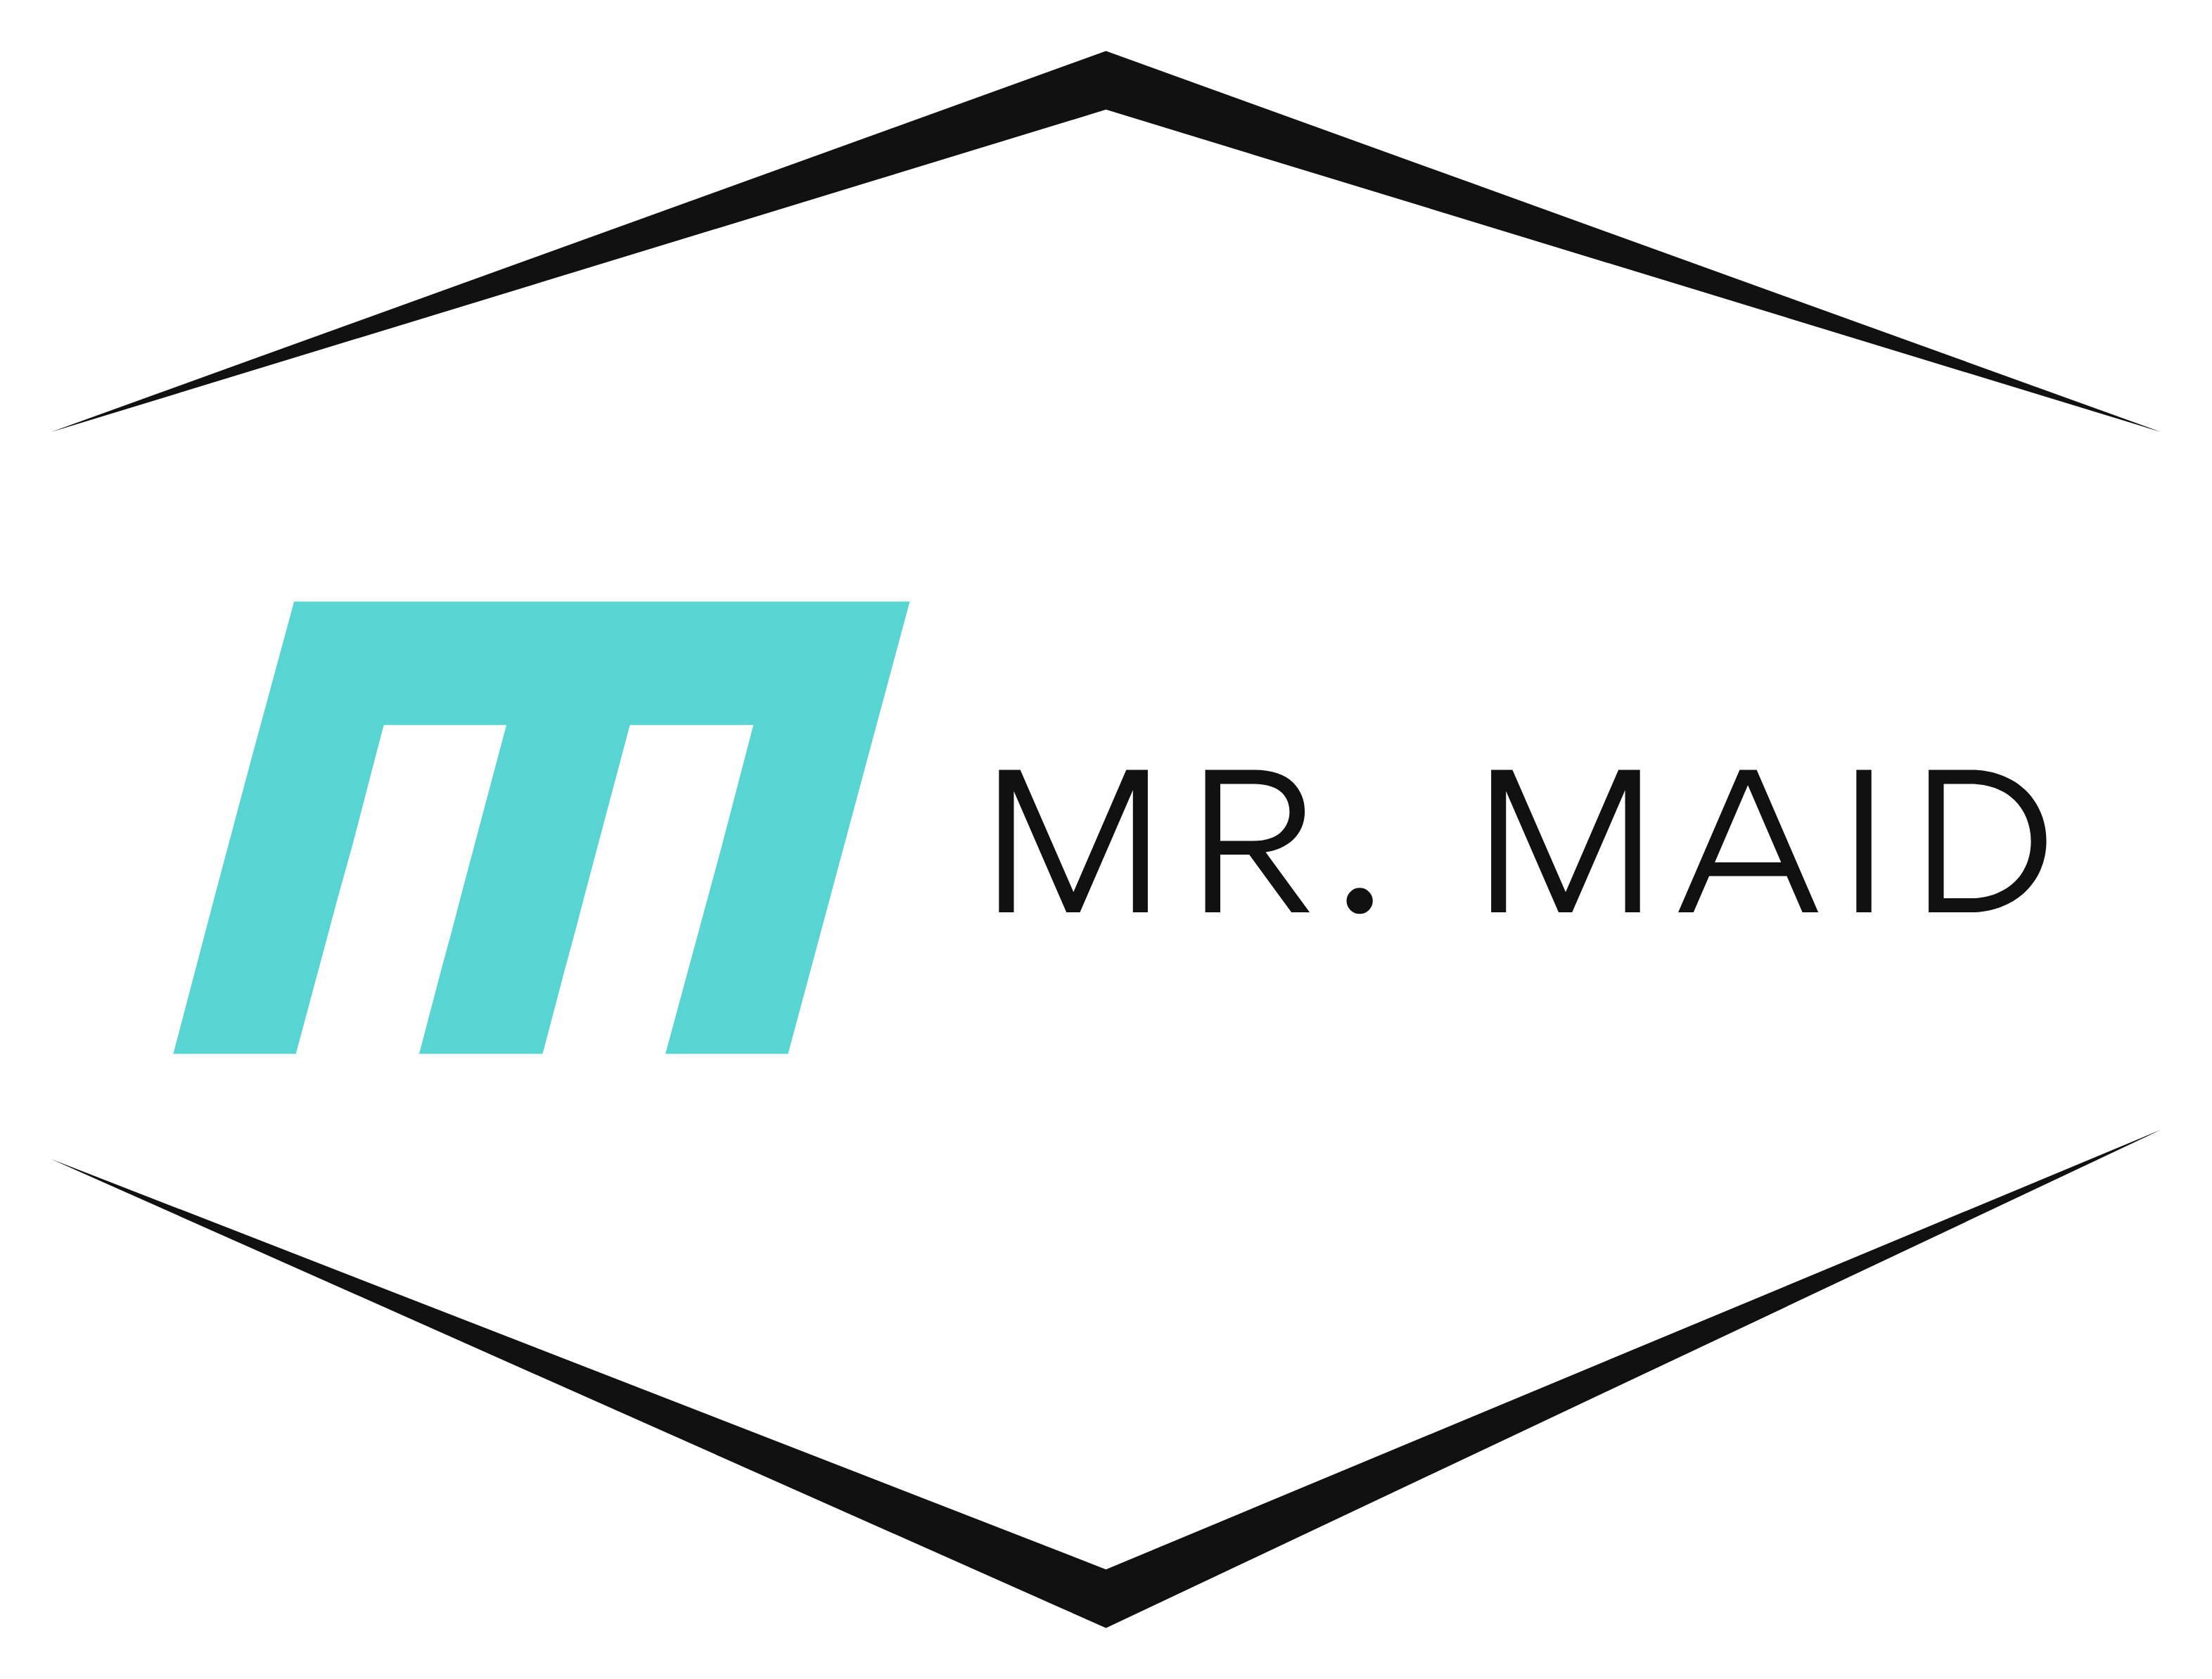 Mr. Maid - Cleaning Services in Southern Manitoba